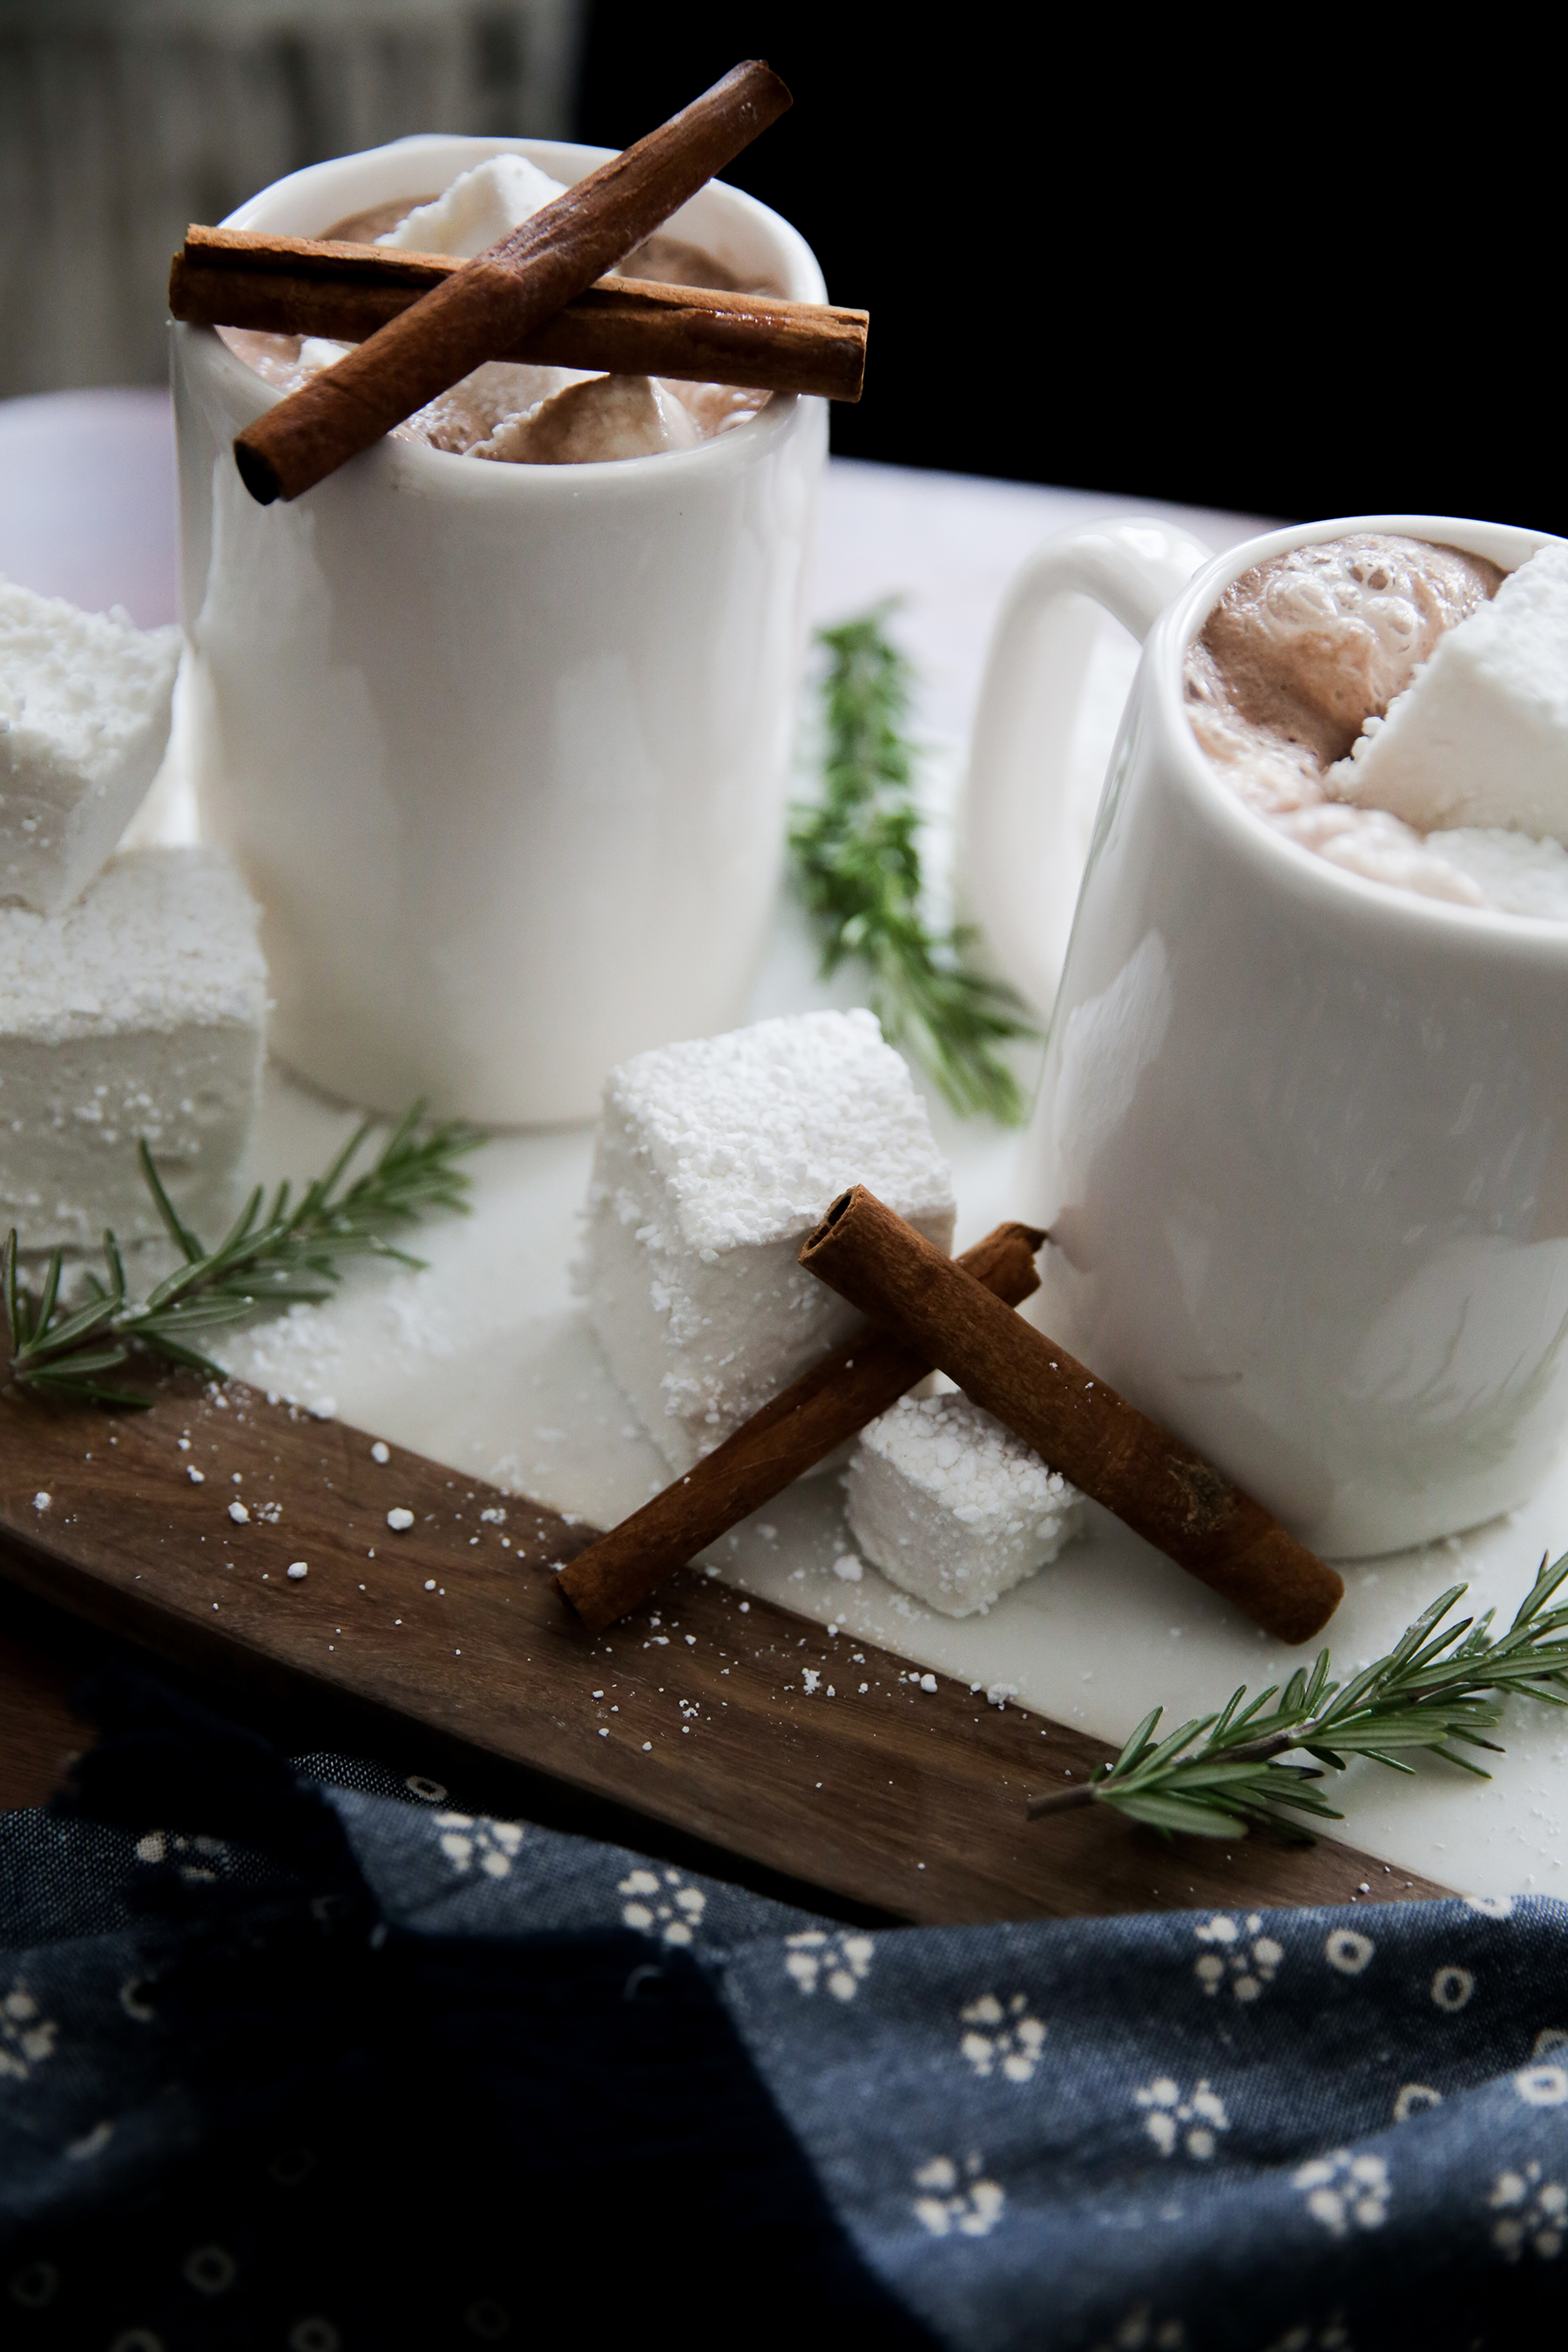 cozy holiday shoot, hot cocoa, plaid, cozy outfit, cute glasses, nude nails, hot chocolate with marshmallows, homemade marshmallows, photos by Andrea Posadas of Amanda Holstein for Advicefroma20Something.com